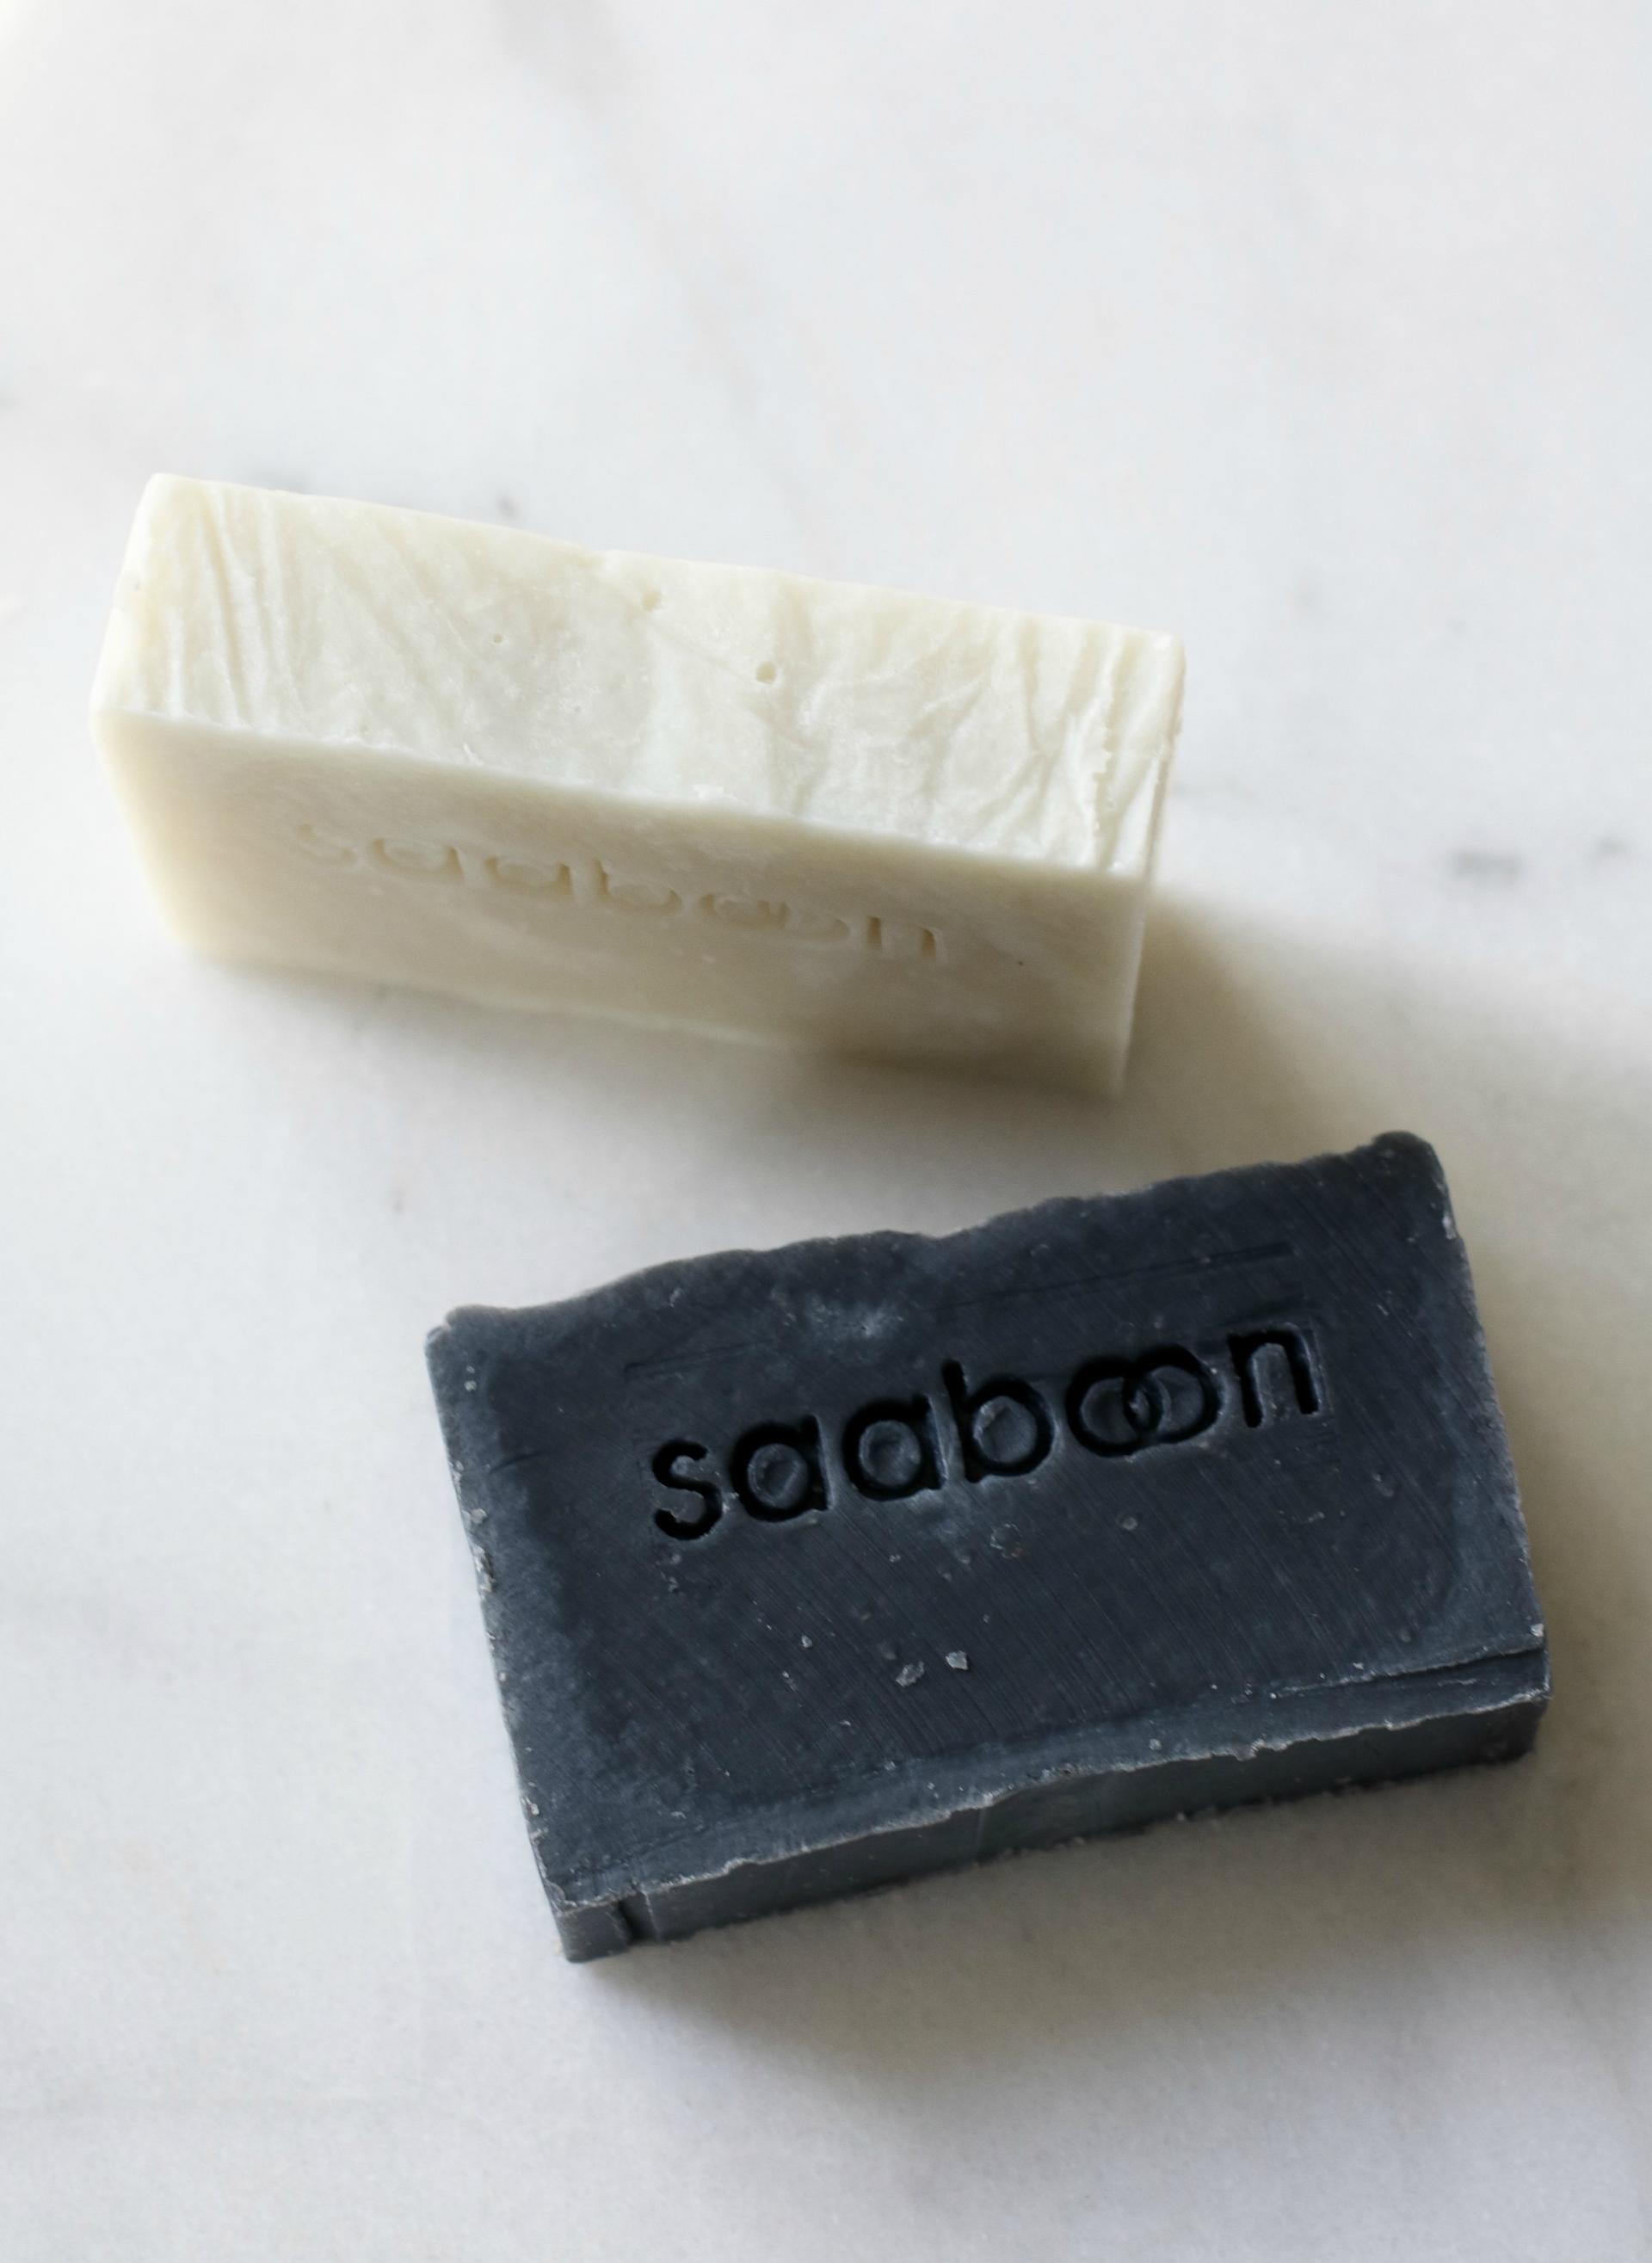 Like natural beauty products? Saaboon's vegan-friendly soaps, face oils, deodorants are some of the best in natural skincare!